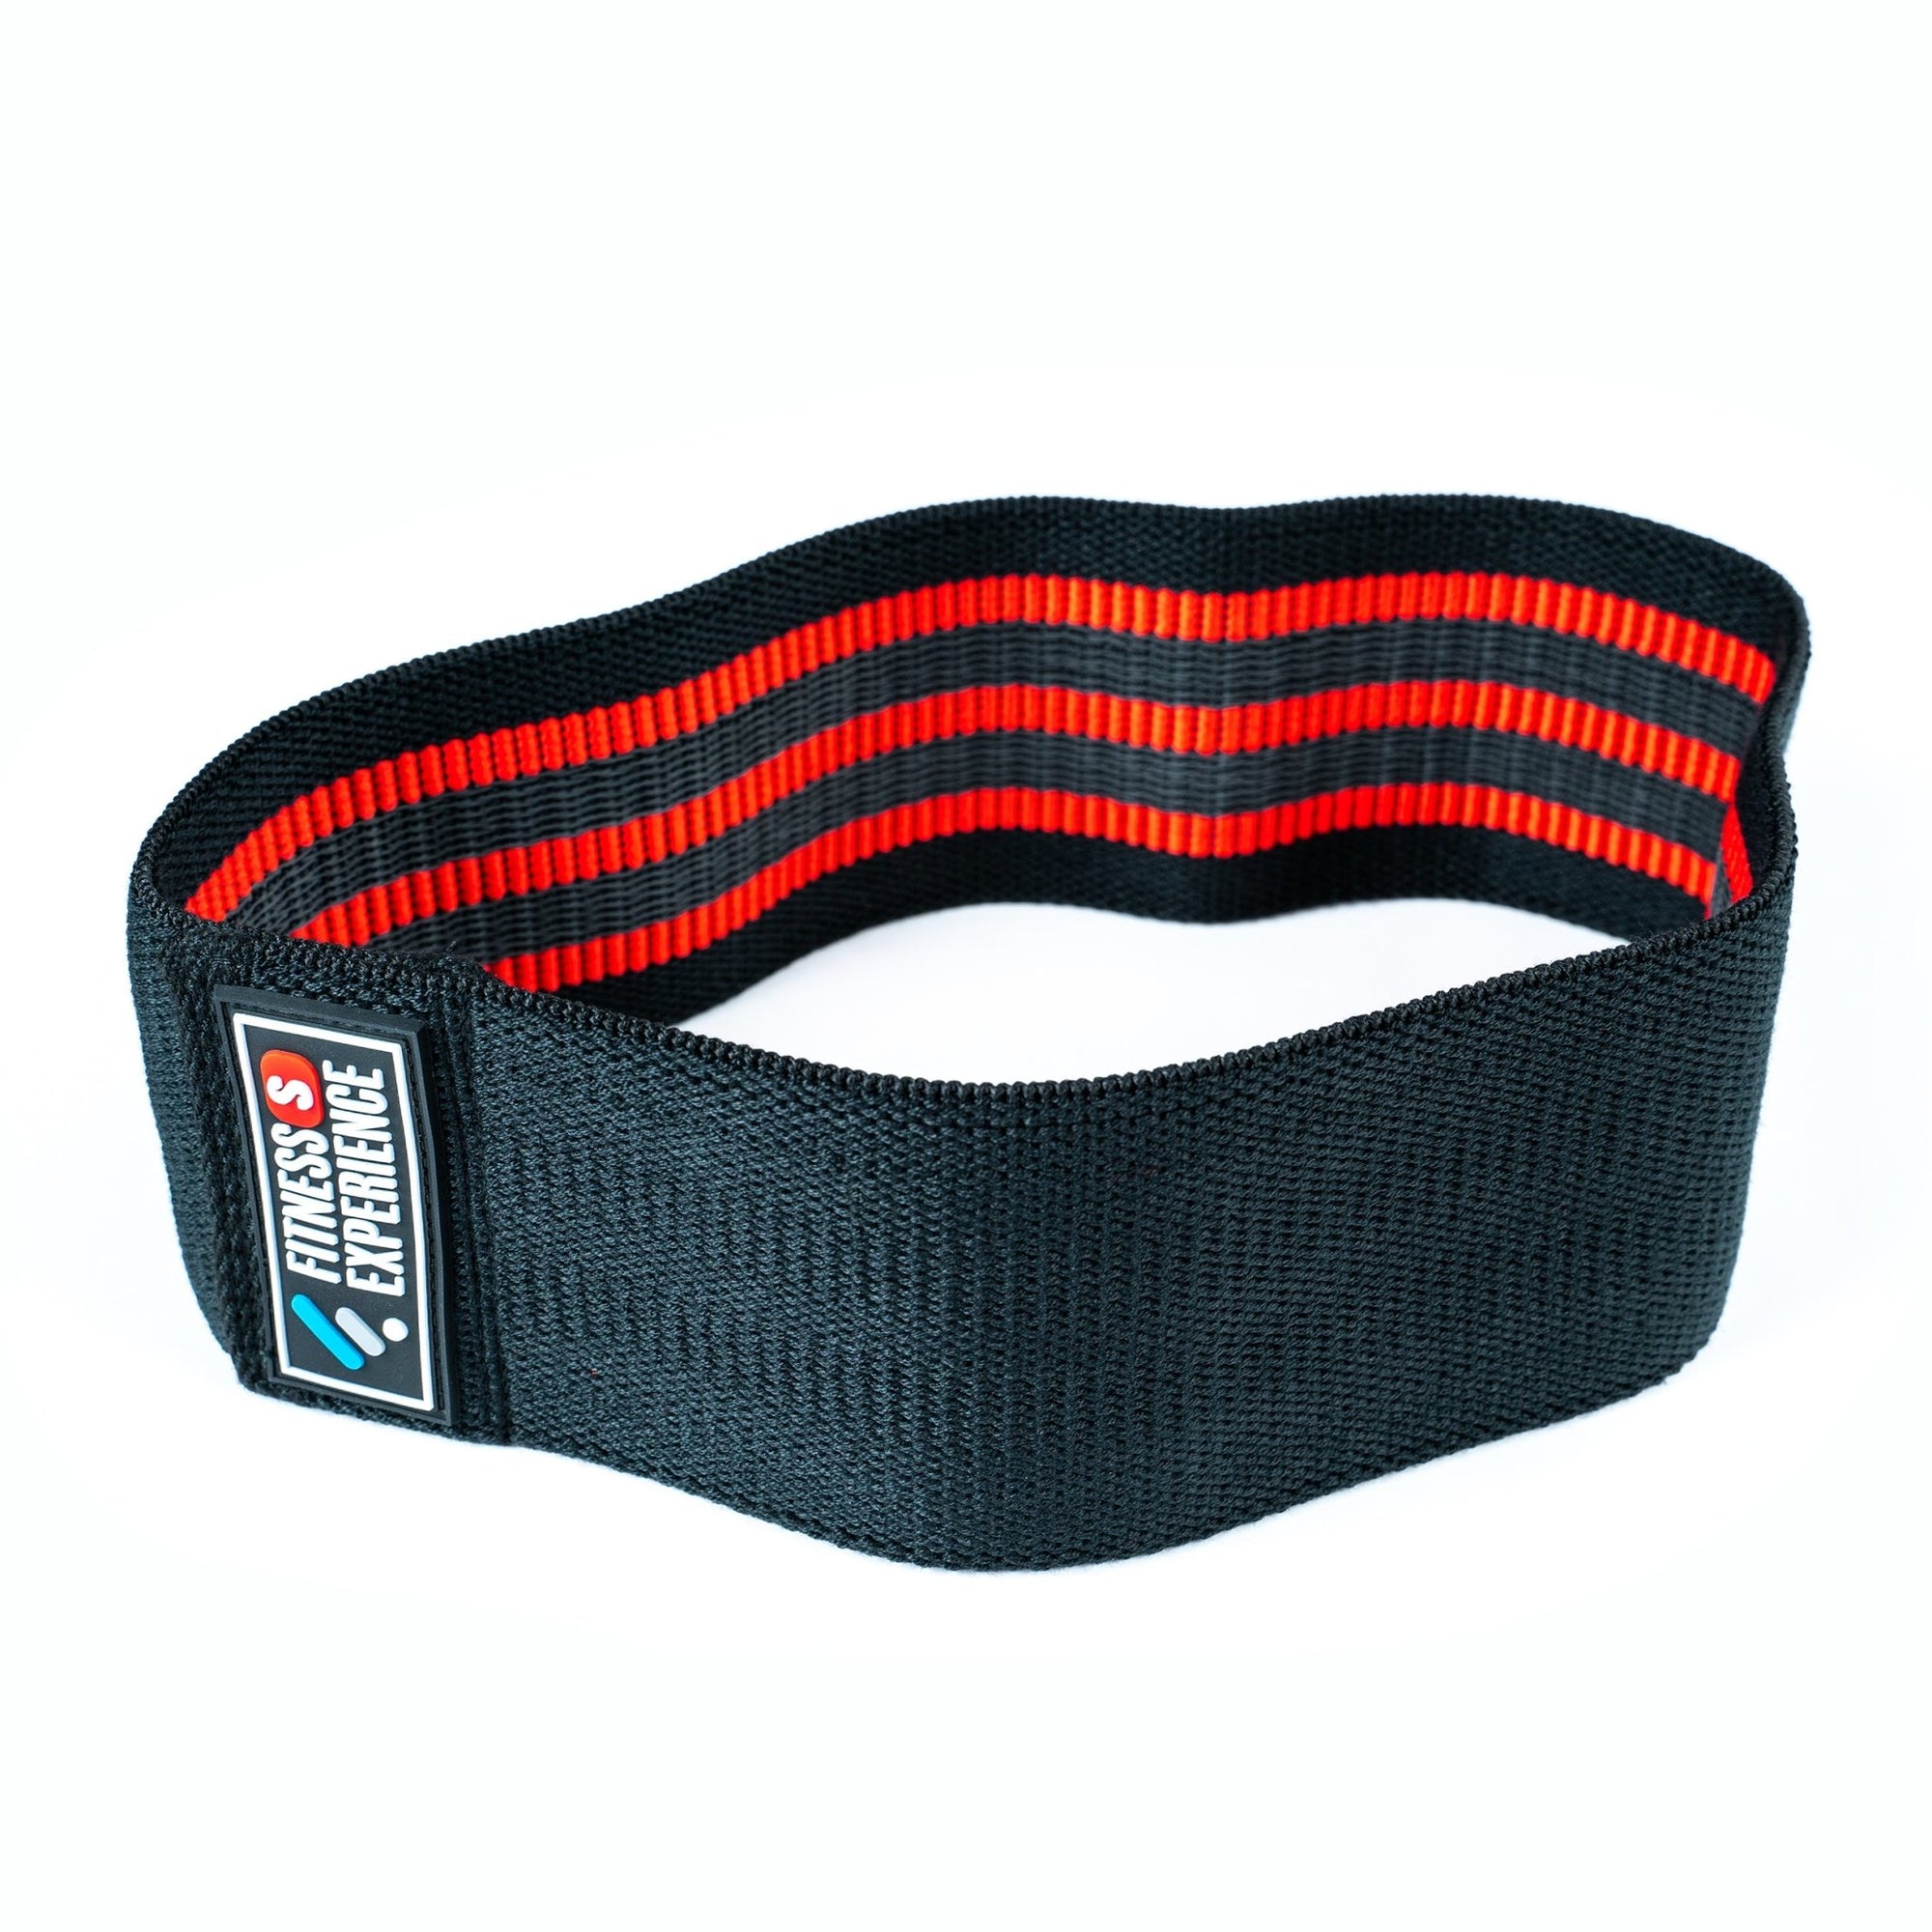 FitWay Equip. Max Fit Hip Band Set 